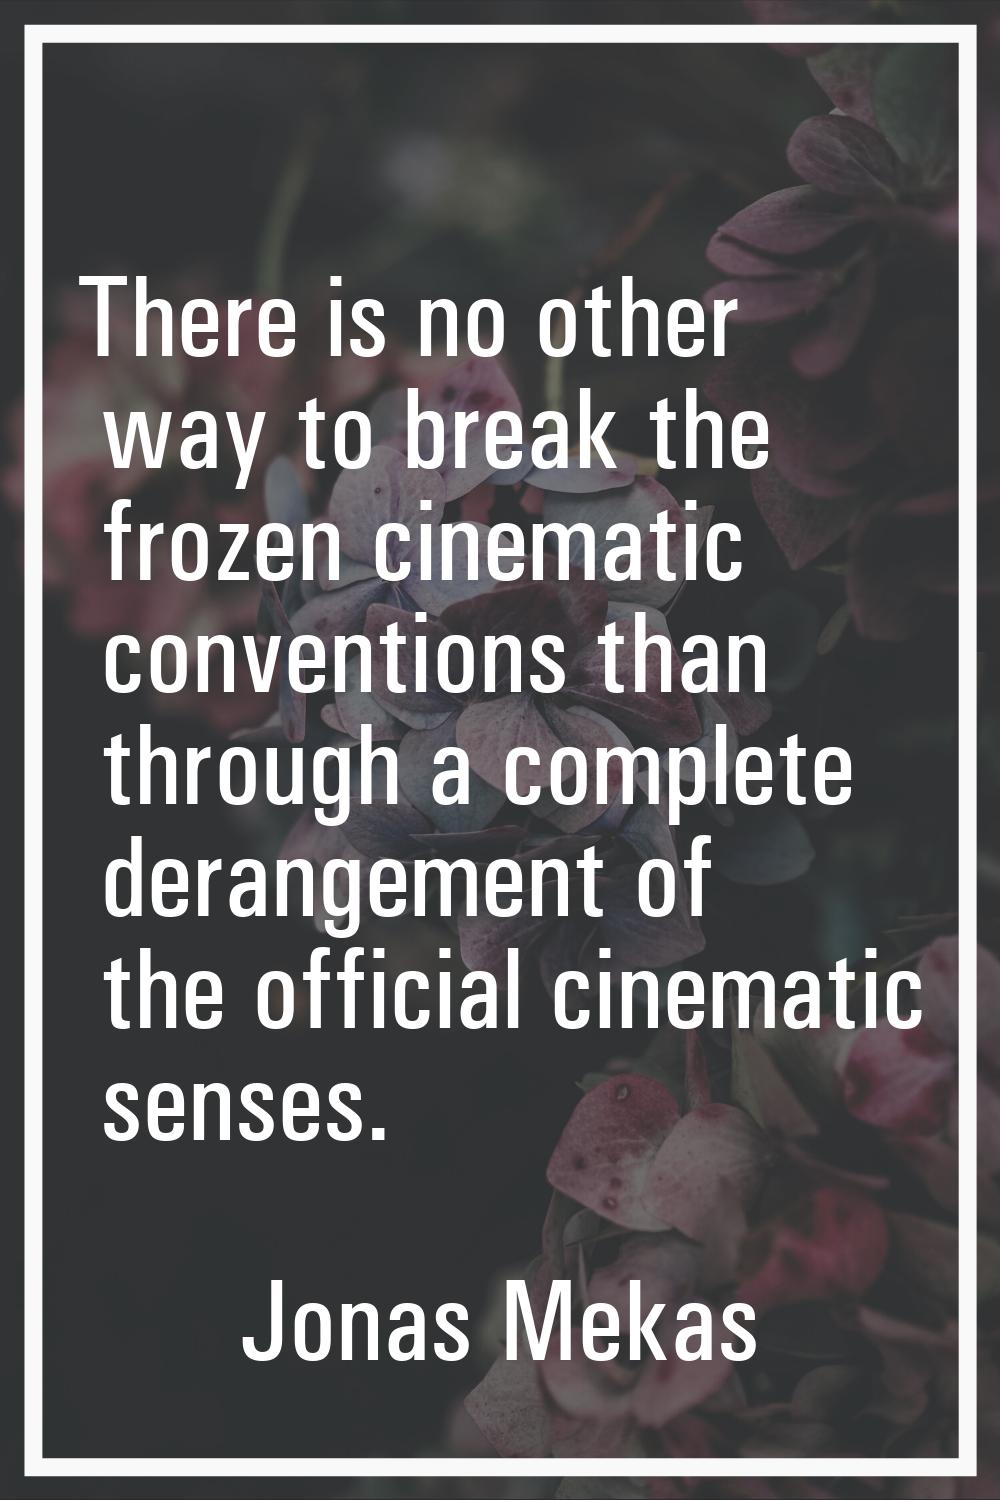 There is no other way to break the frozen cinematic conventions than through a complete derangement